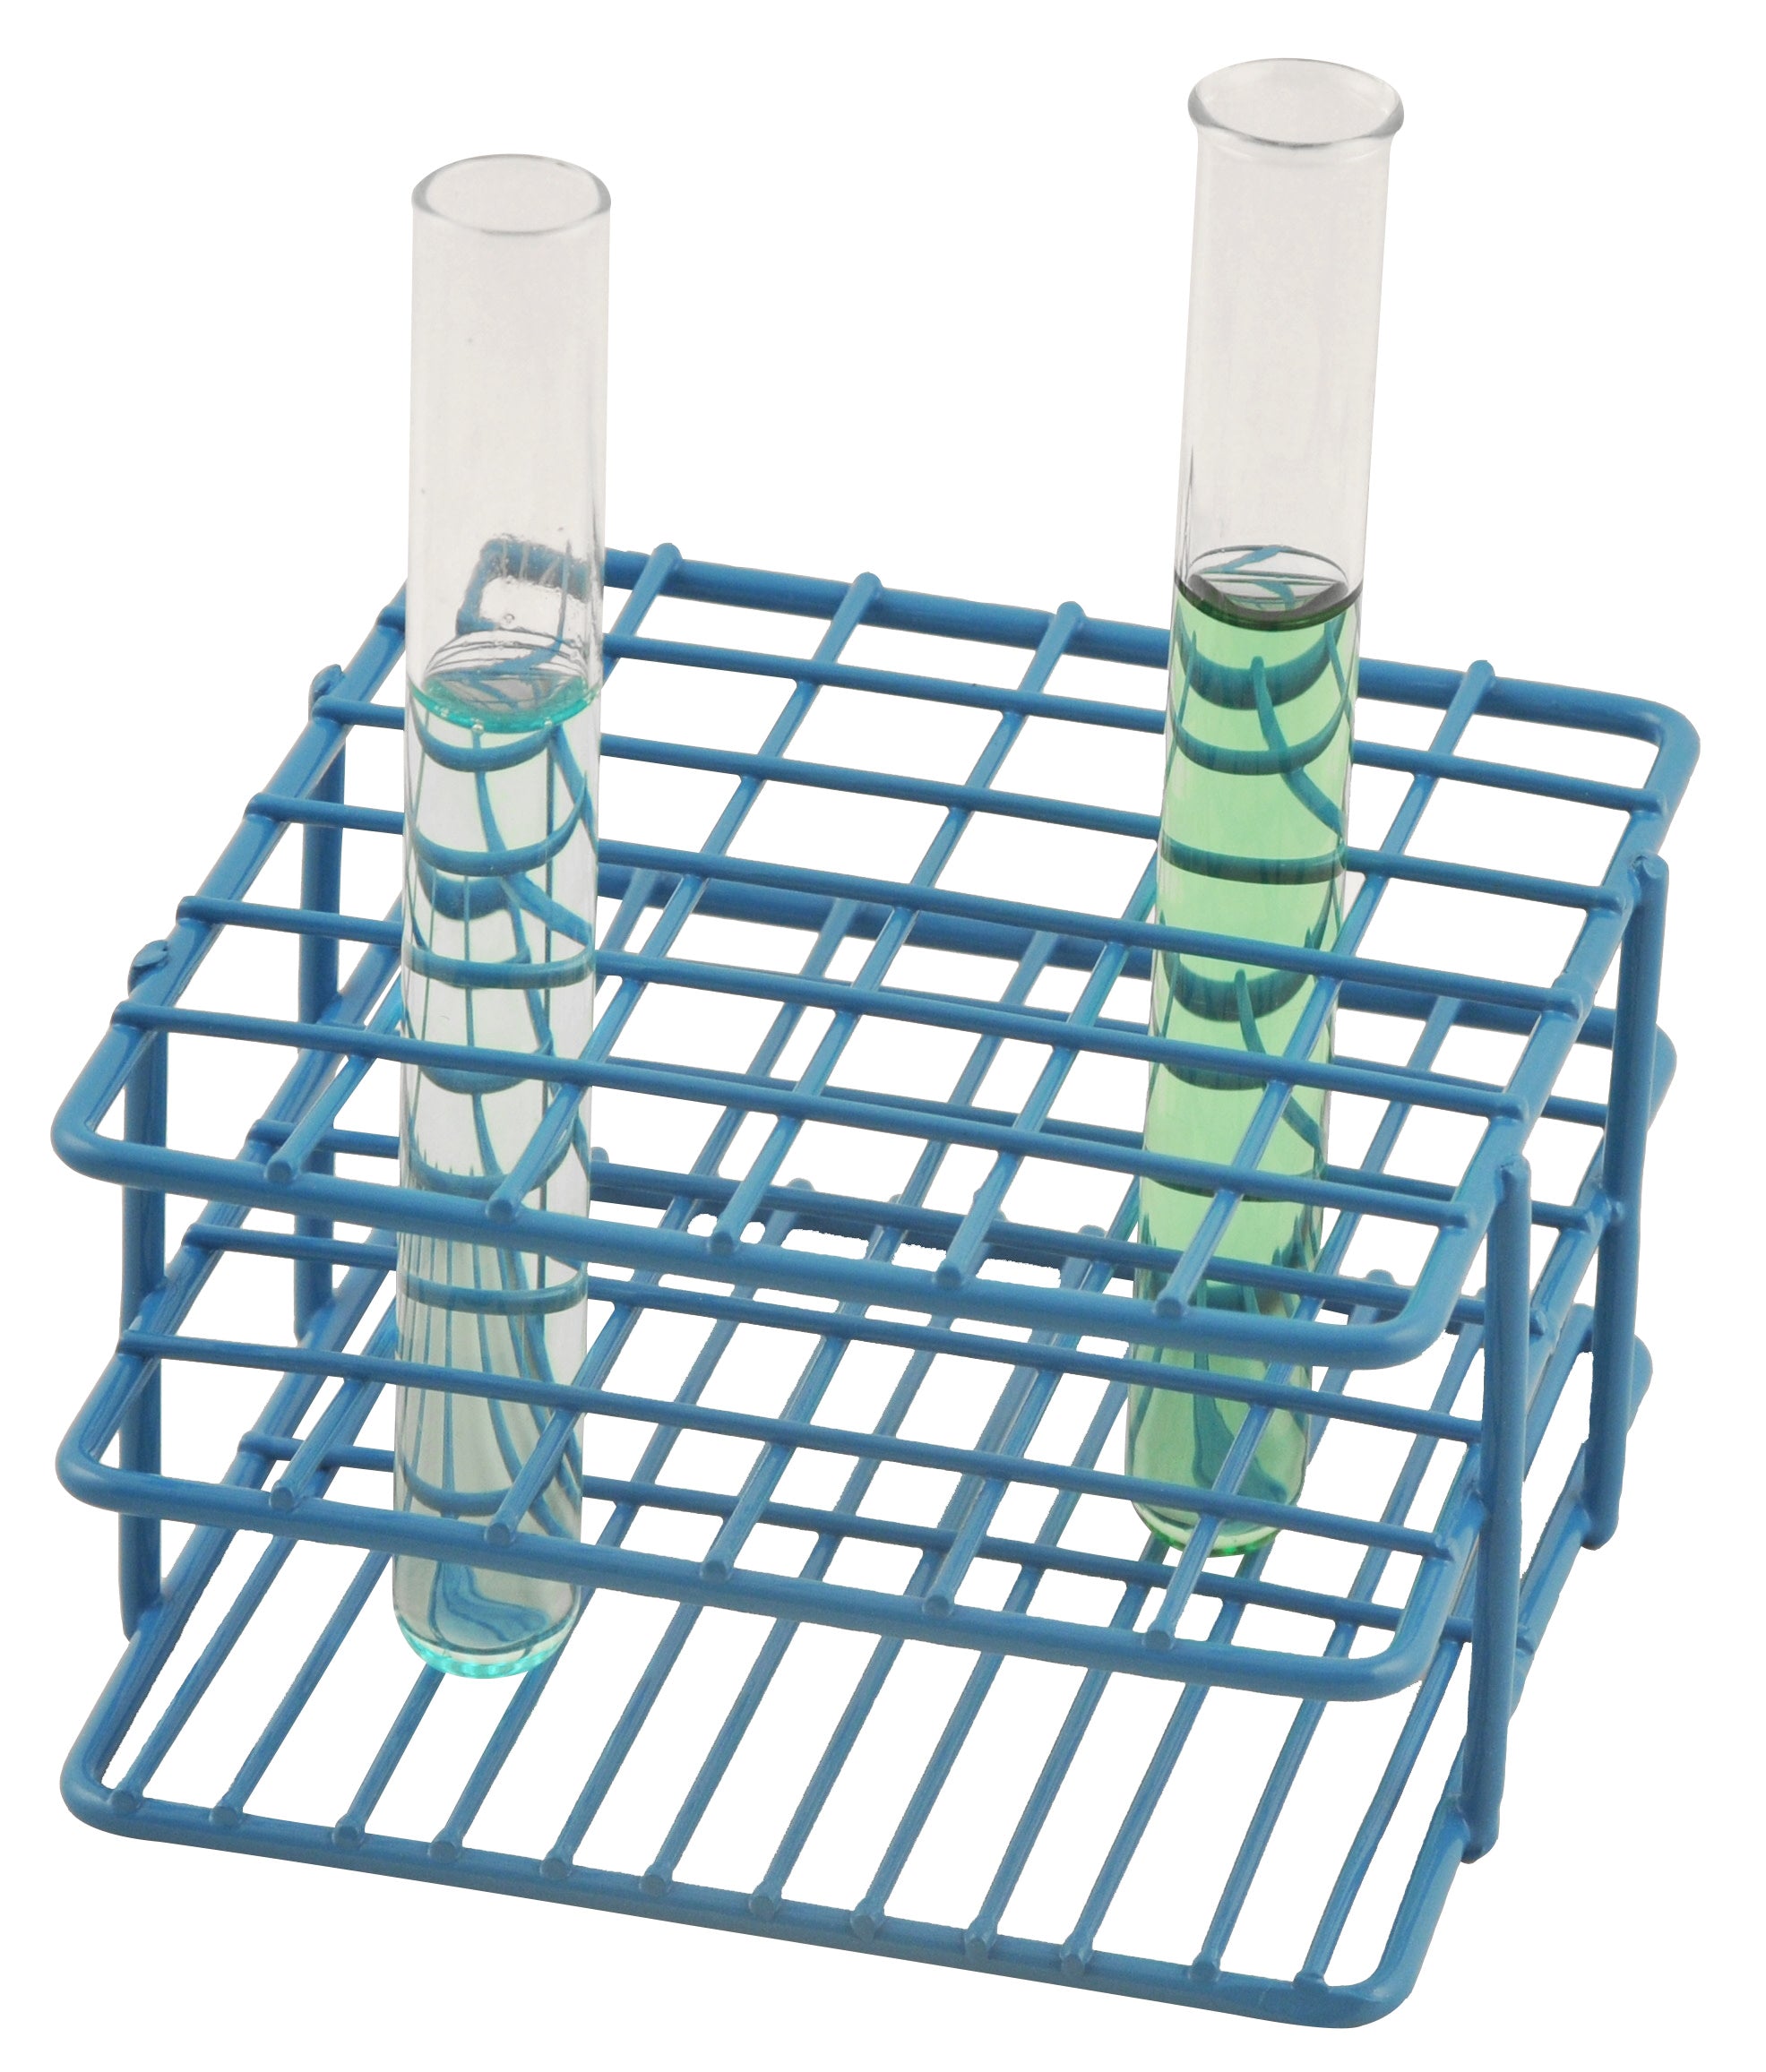 Blue Epoxy Coated Steel Wire Test Tube Rack, 36 Tubes (10-13mm), 6 X 6 Format